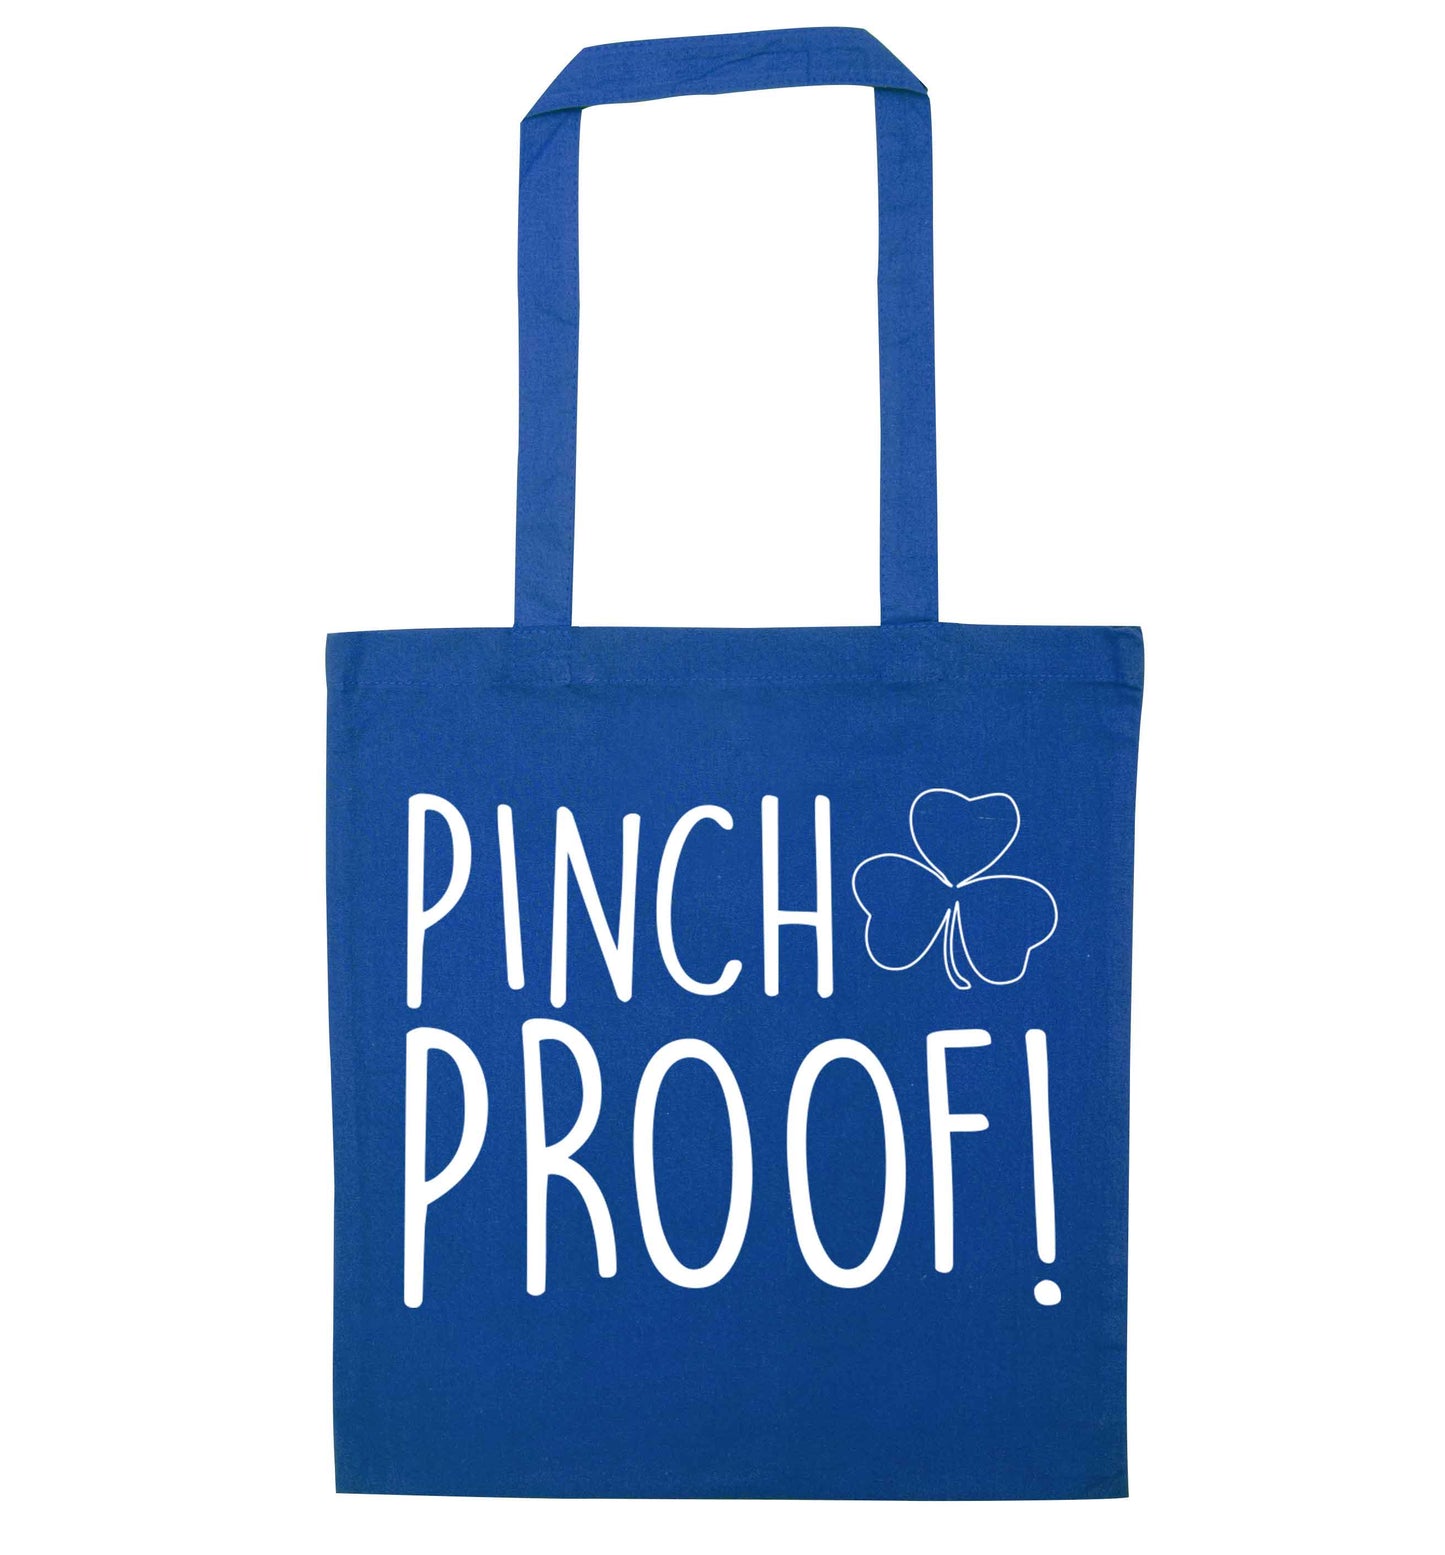 Pinch Proof blue tote bag